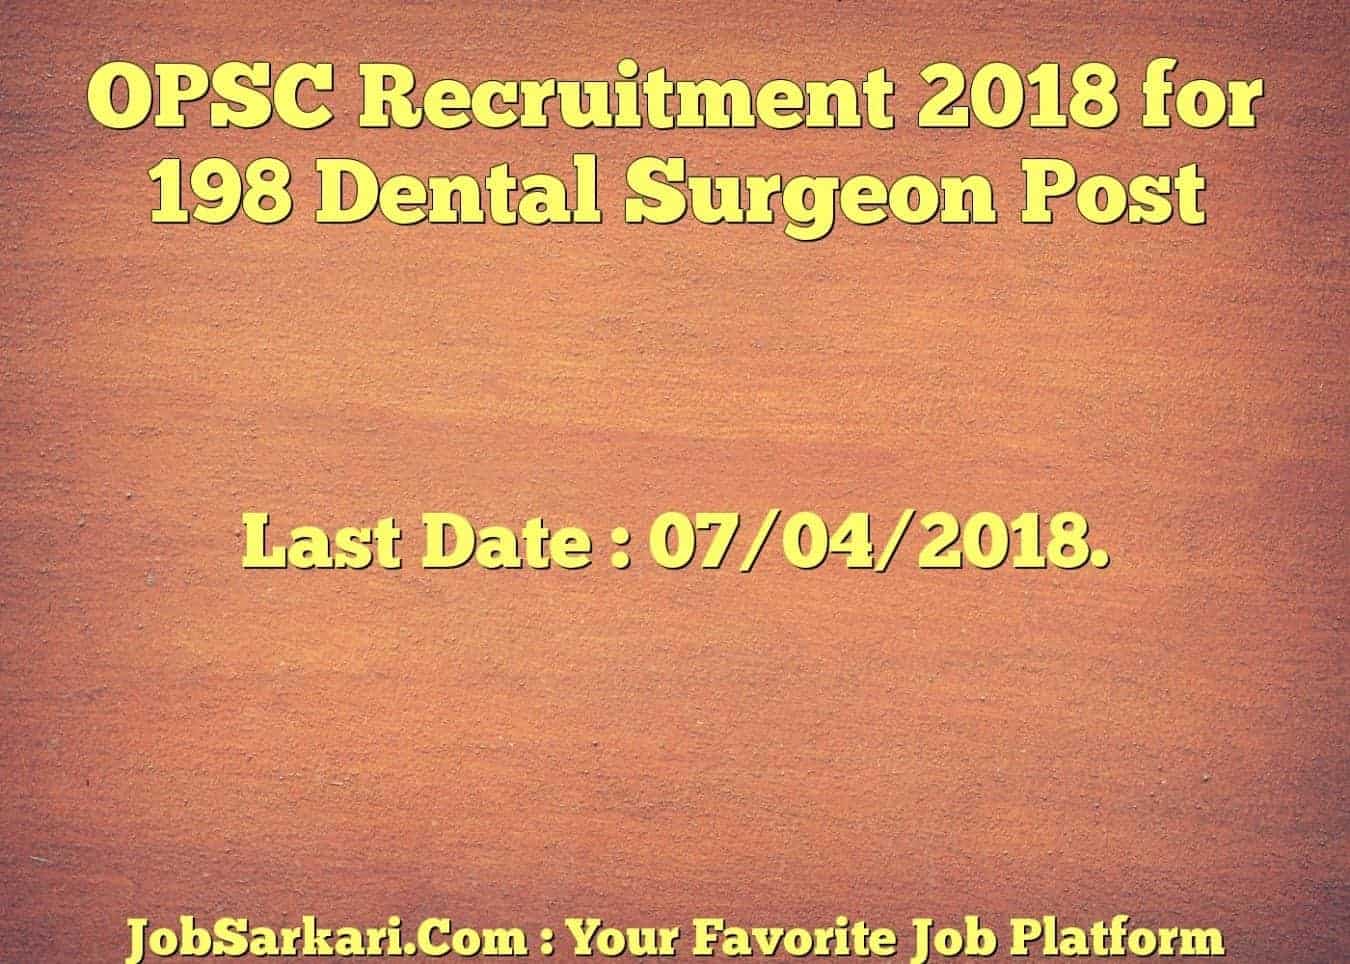 OPSC Recruitment 2018 for 198 Dental Surgeon Post